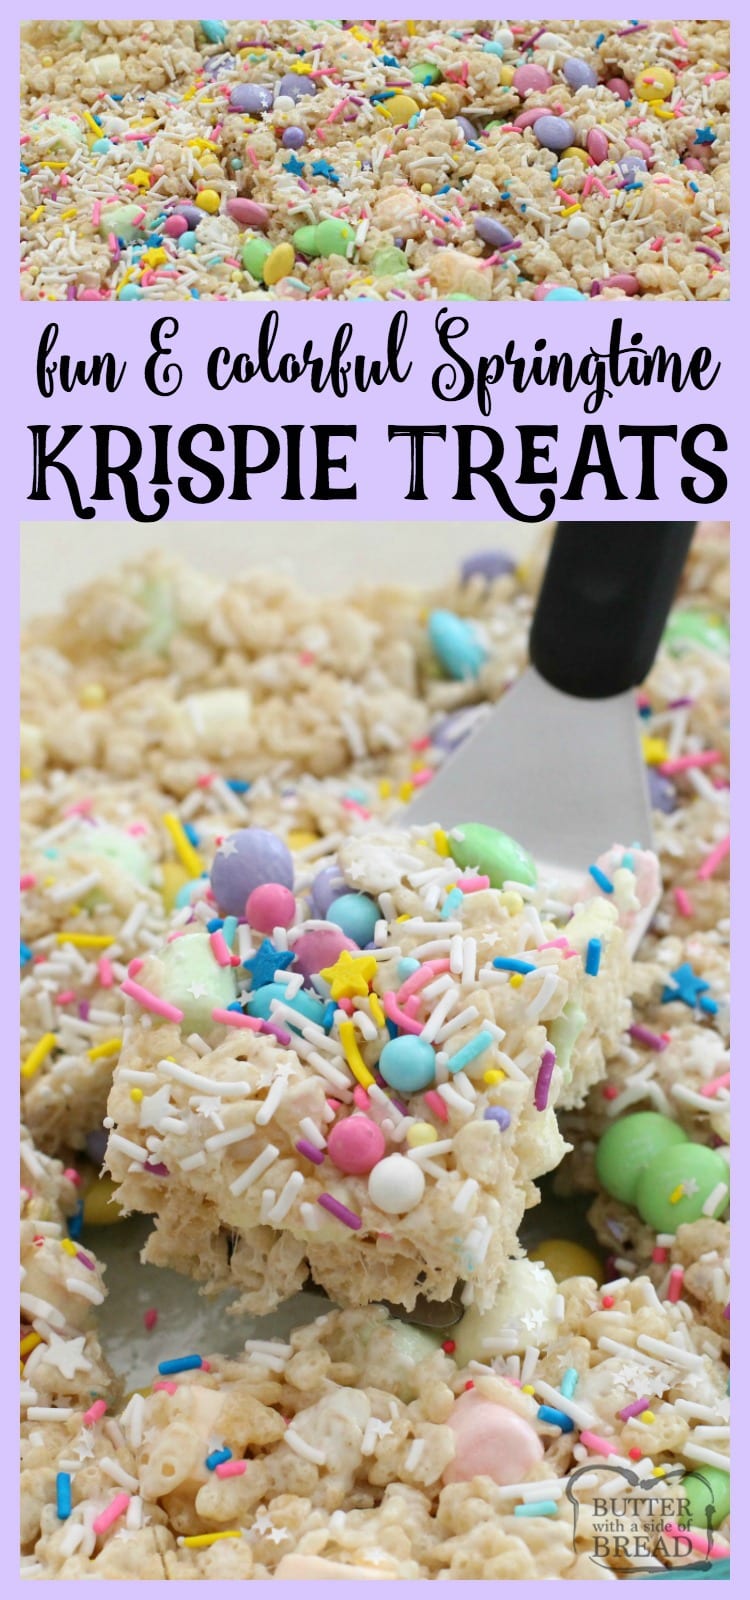 Super fun & easy to make, these Spring Krispie Treats are amazing! The extra butter and marshmallows helps too I'm sure. LOVE the added sprinkles! Easy dessert recipe from Butter With A Side of Bread